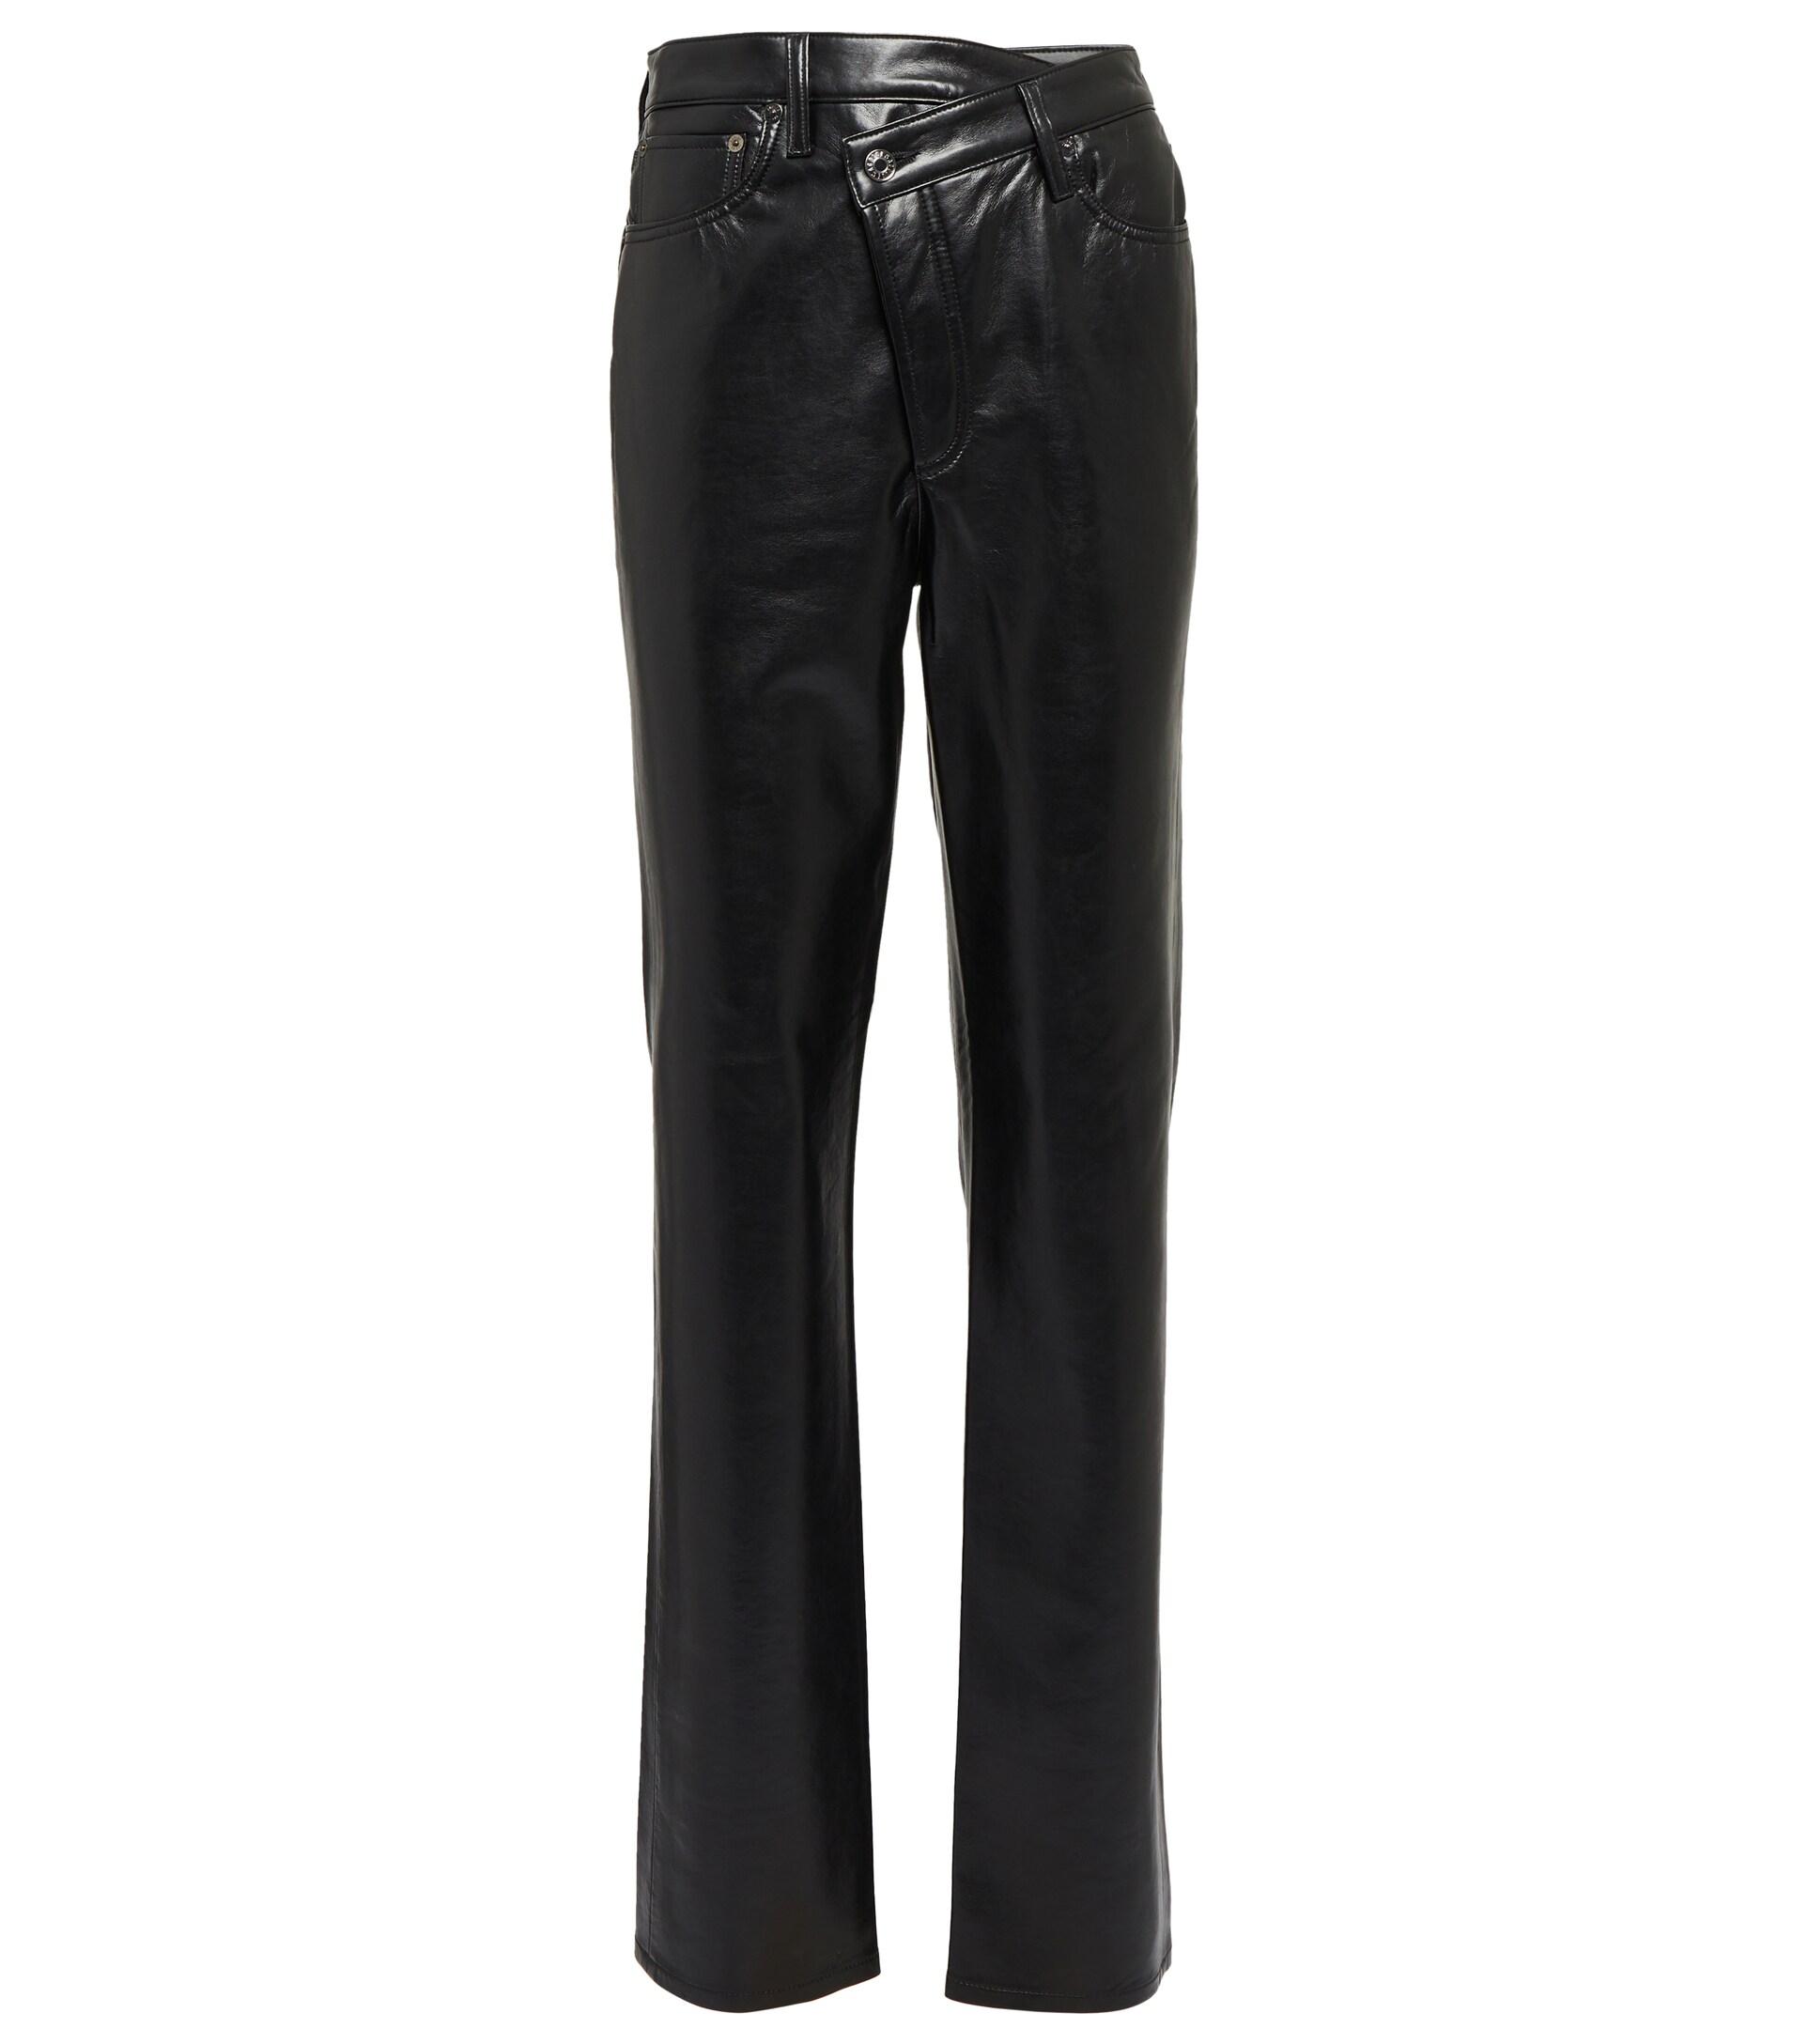 Agolde Criss-cross High-rise Faux Leather Pants in Black | Lyst